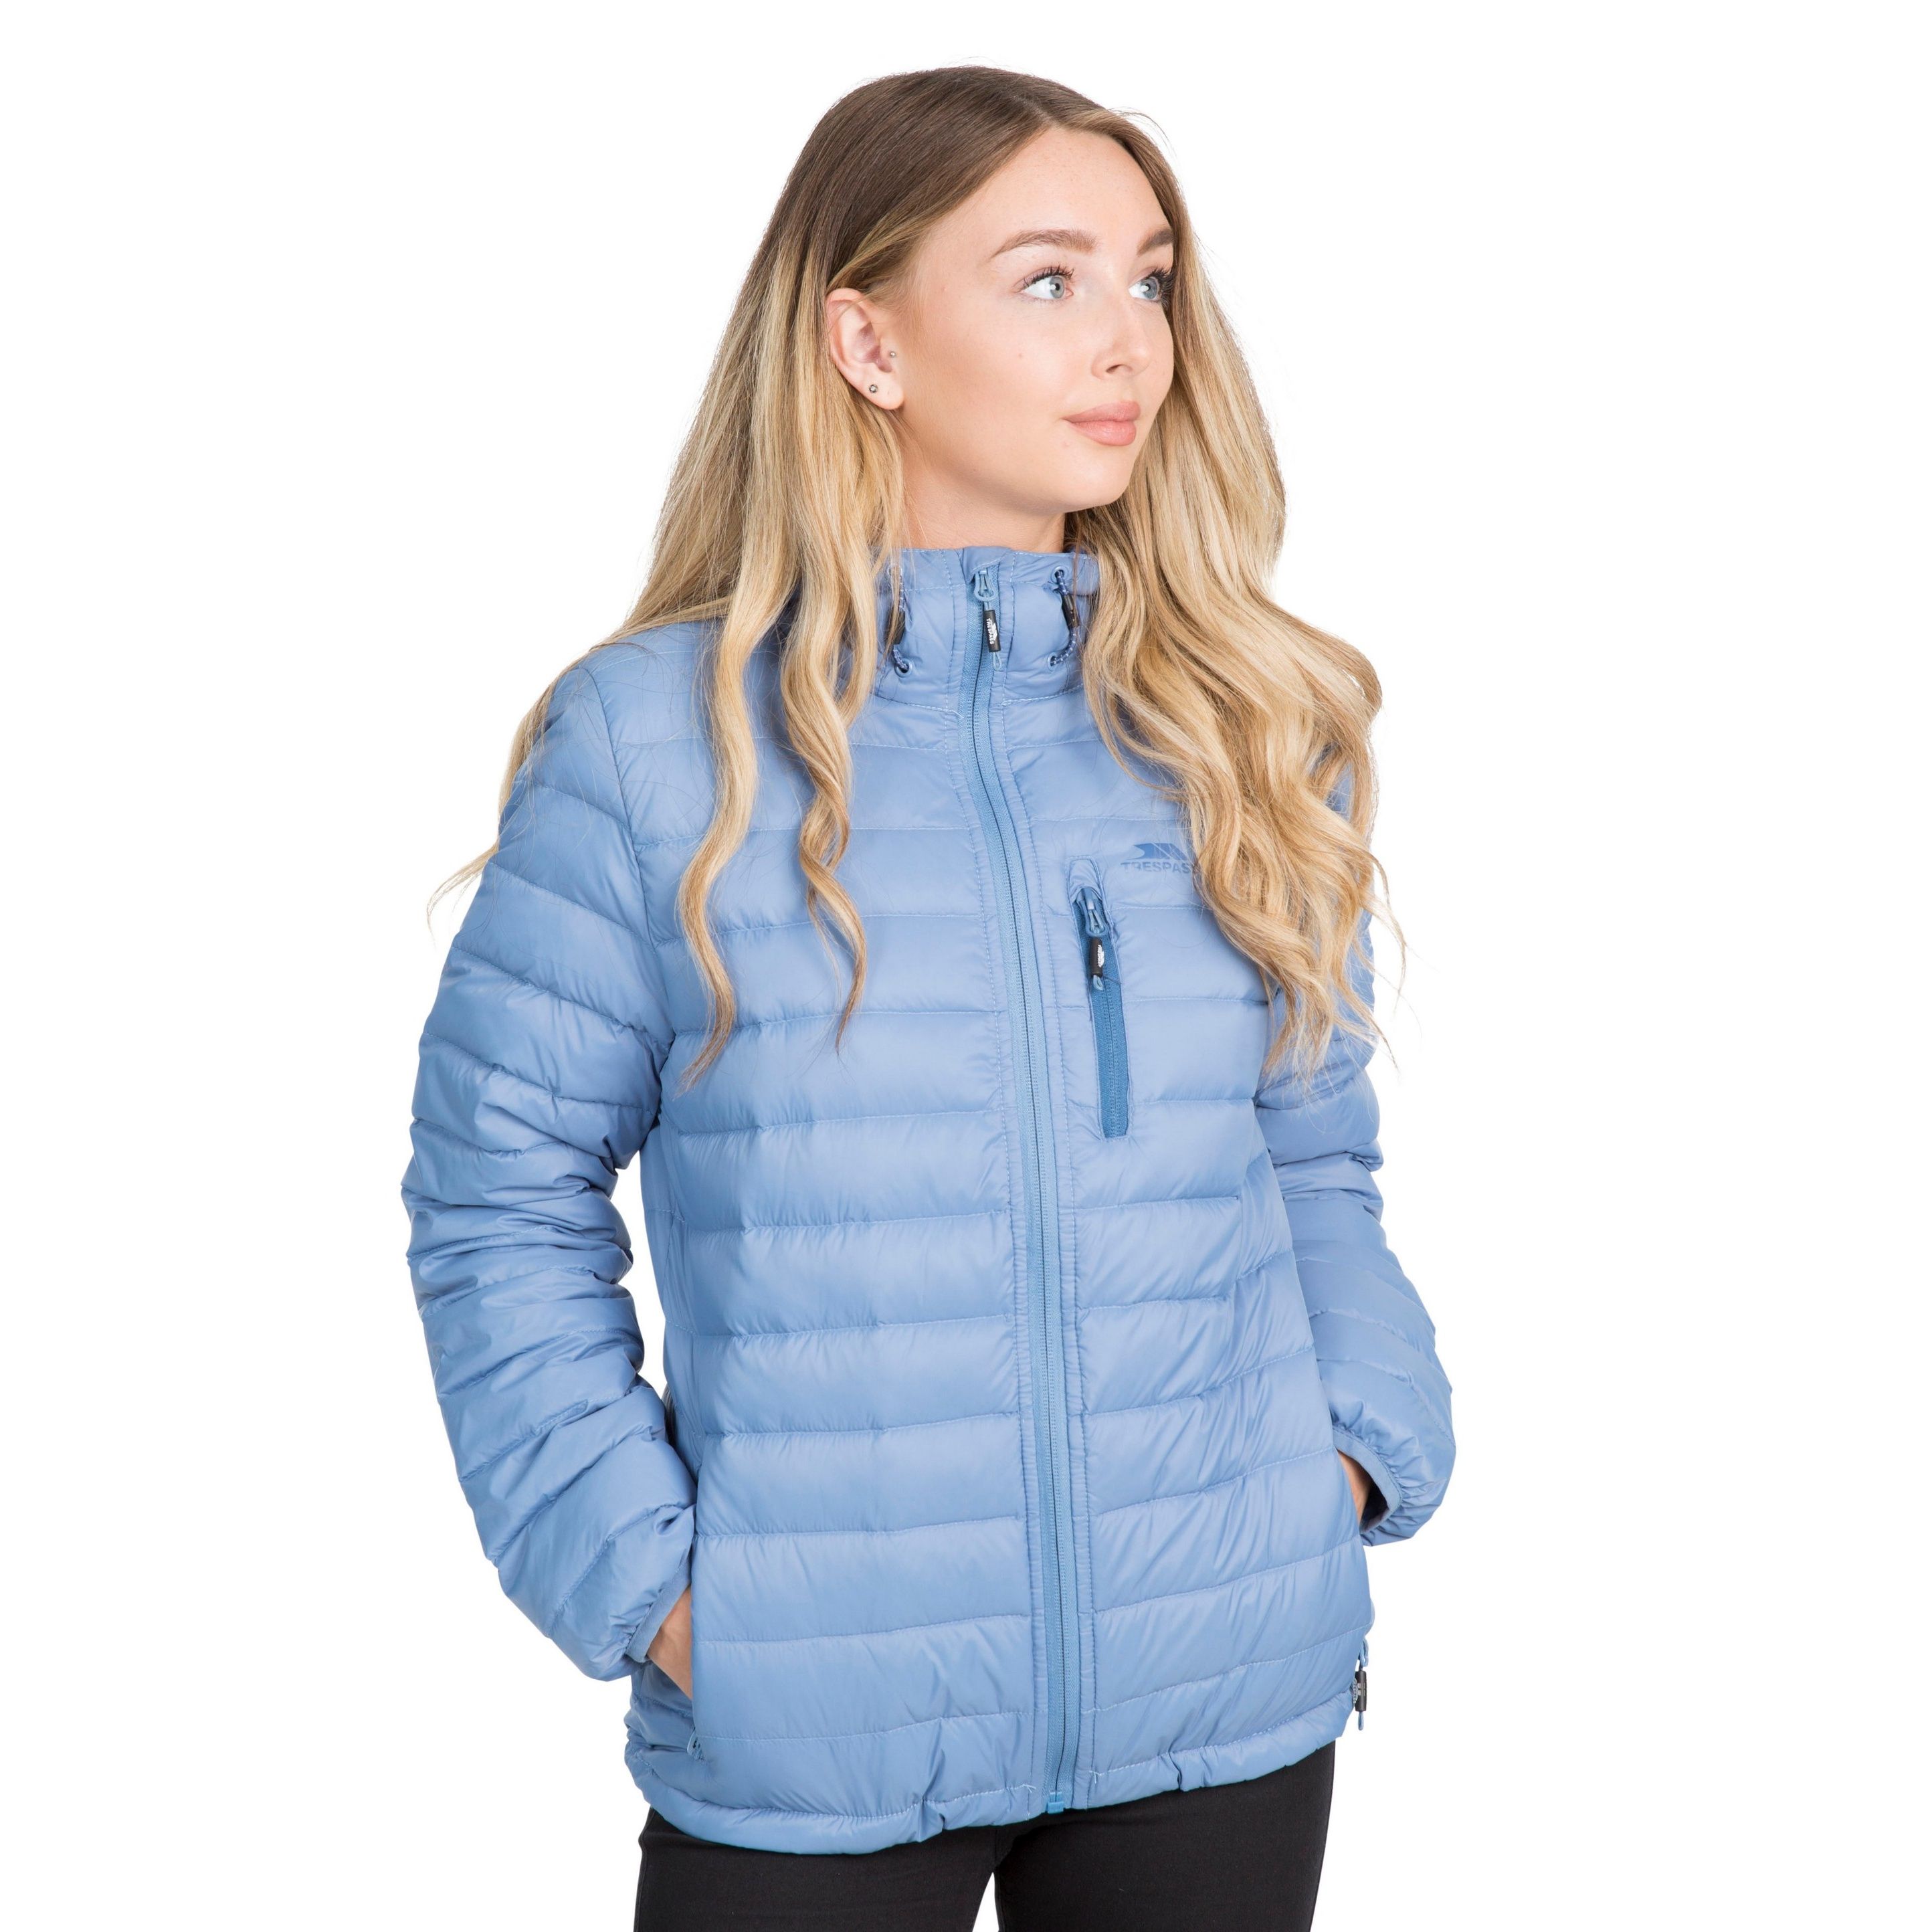 Ultra lightweight jacket. Grown on adjustable hood. Contrast zipped chest pocket. 2 zipped lower pockets. Low profile front zip. Drawcord at hem. Stuff sack in pocket. Shell: 100% Polyamide 380T, Lining: 100% Polyamide 380T downproof lining, Filling 80% Down, 20% Feather. Trespass Womens Chest Sizing (approx): XS/8 - 32in/81cm, S/10 - 34in/86cm, M/12 - 36in/91.4cm, L/14 - 38in/96.5cm, XL/16 - 40in/101.5cm, XXL/18 - 42in/106.5cm.